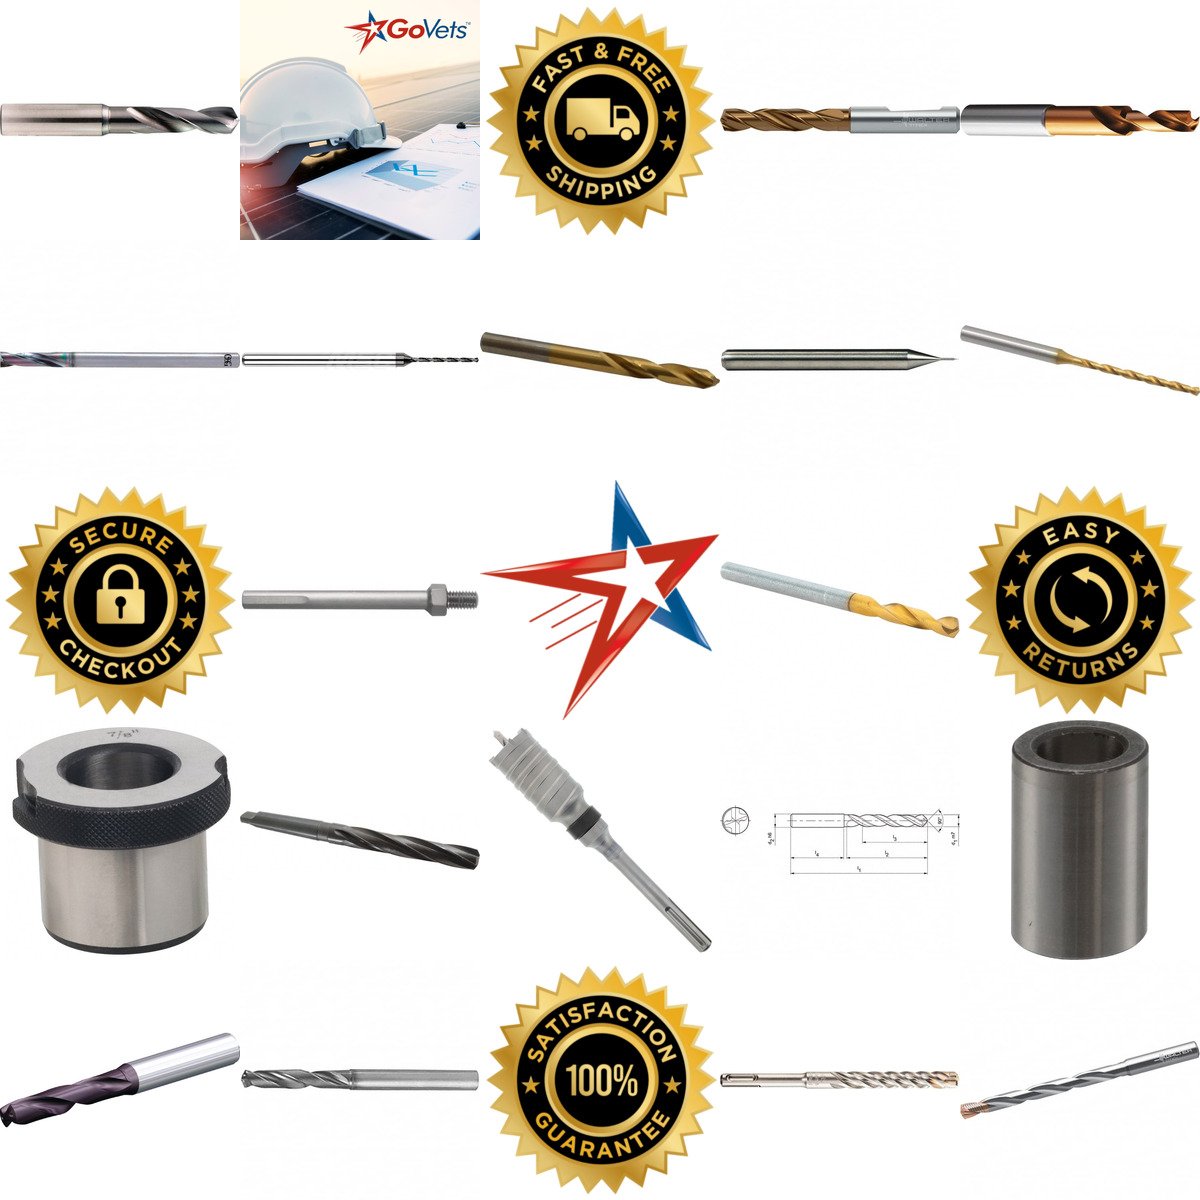 A selection of Drilling and Drill Bits products on GoVets